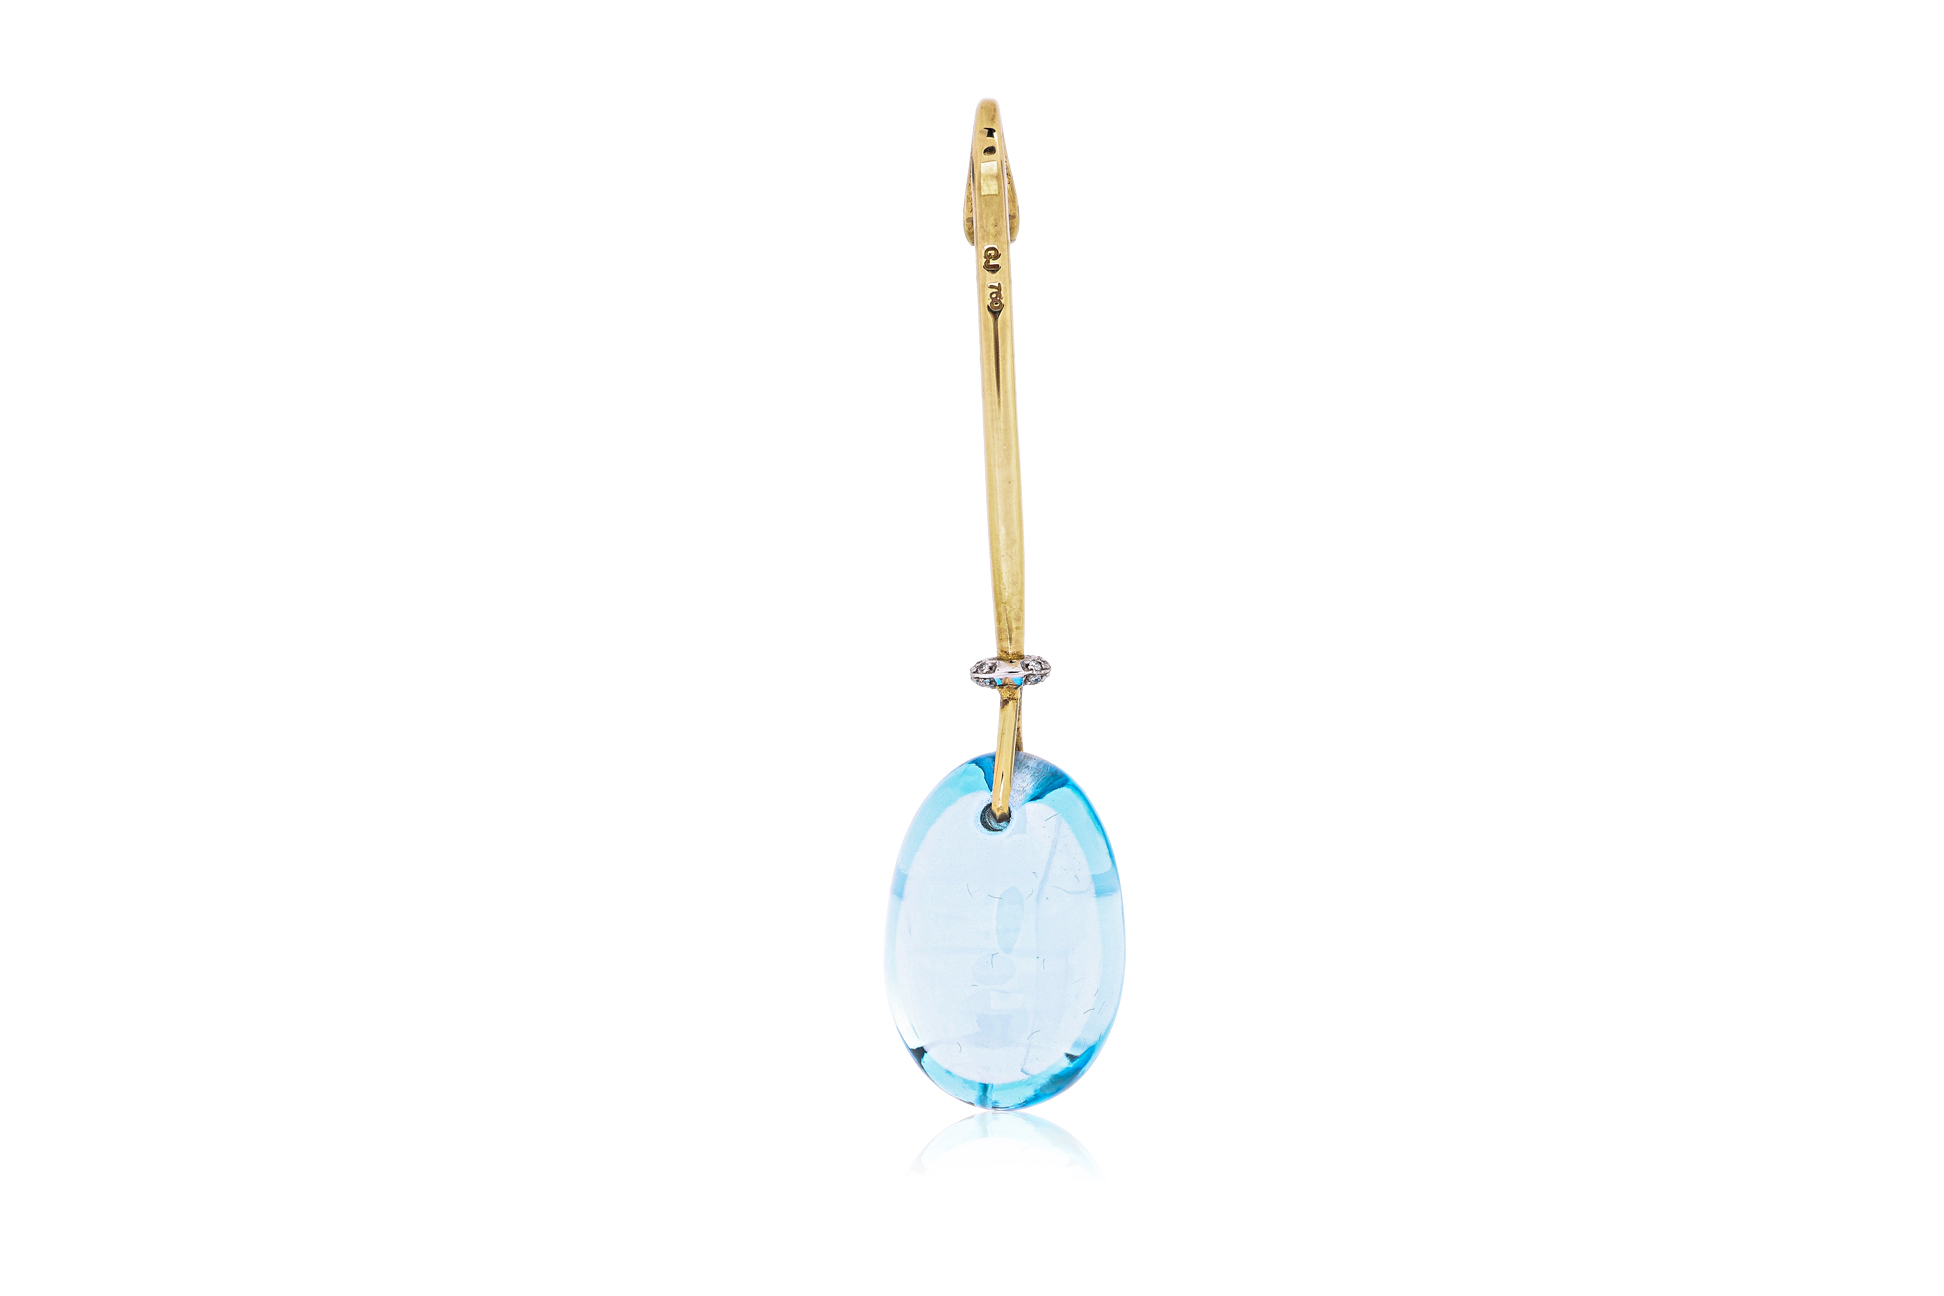 A BLUE TOPAZ AND DIAMOND 'DEW DROP' PENDANT BY GEORG JENSEN - Image 2 of 5